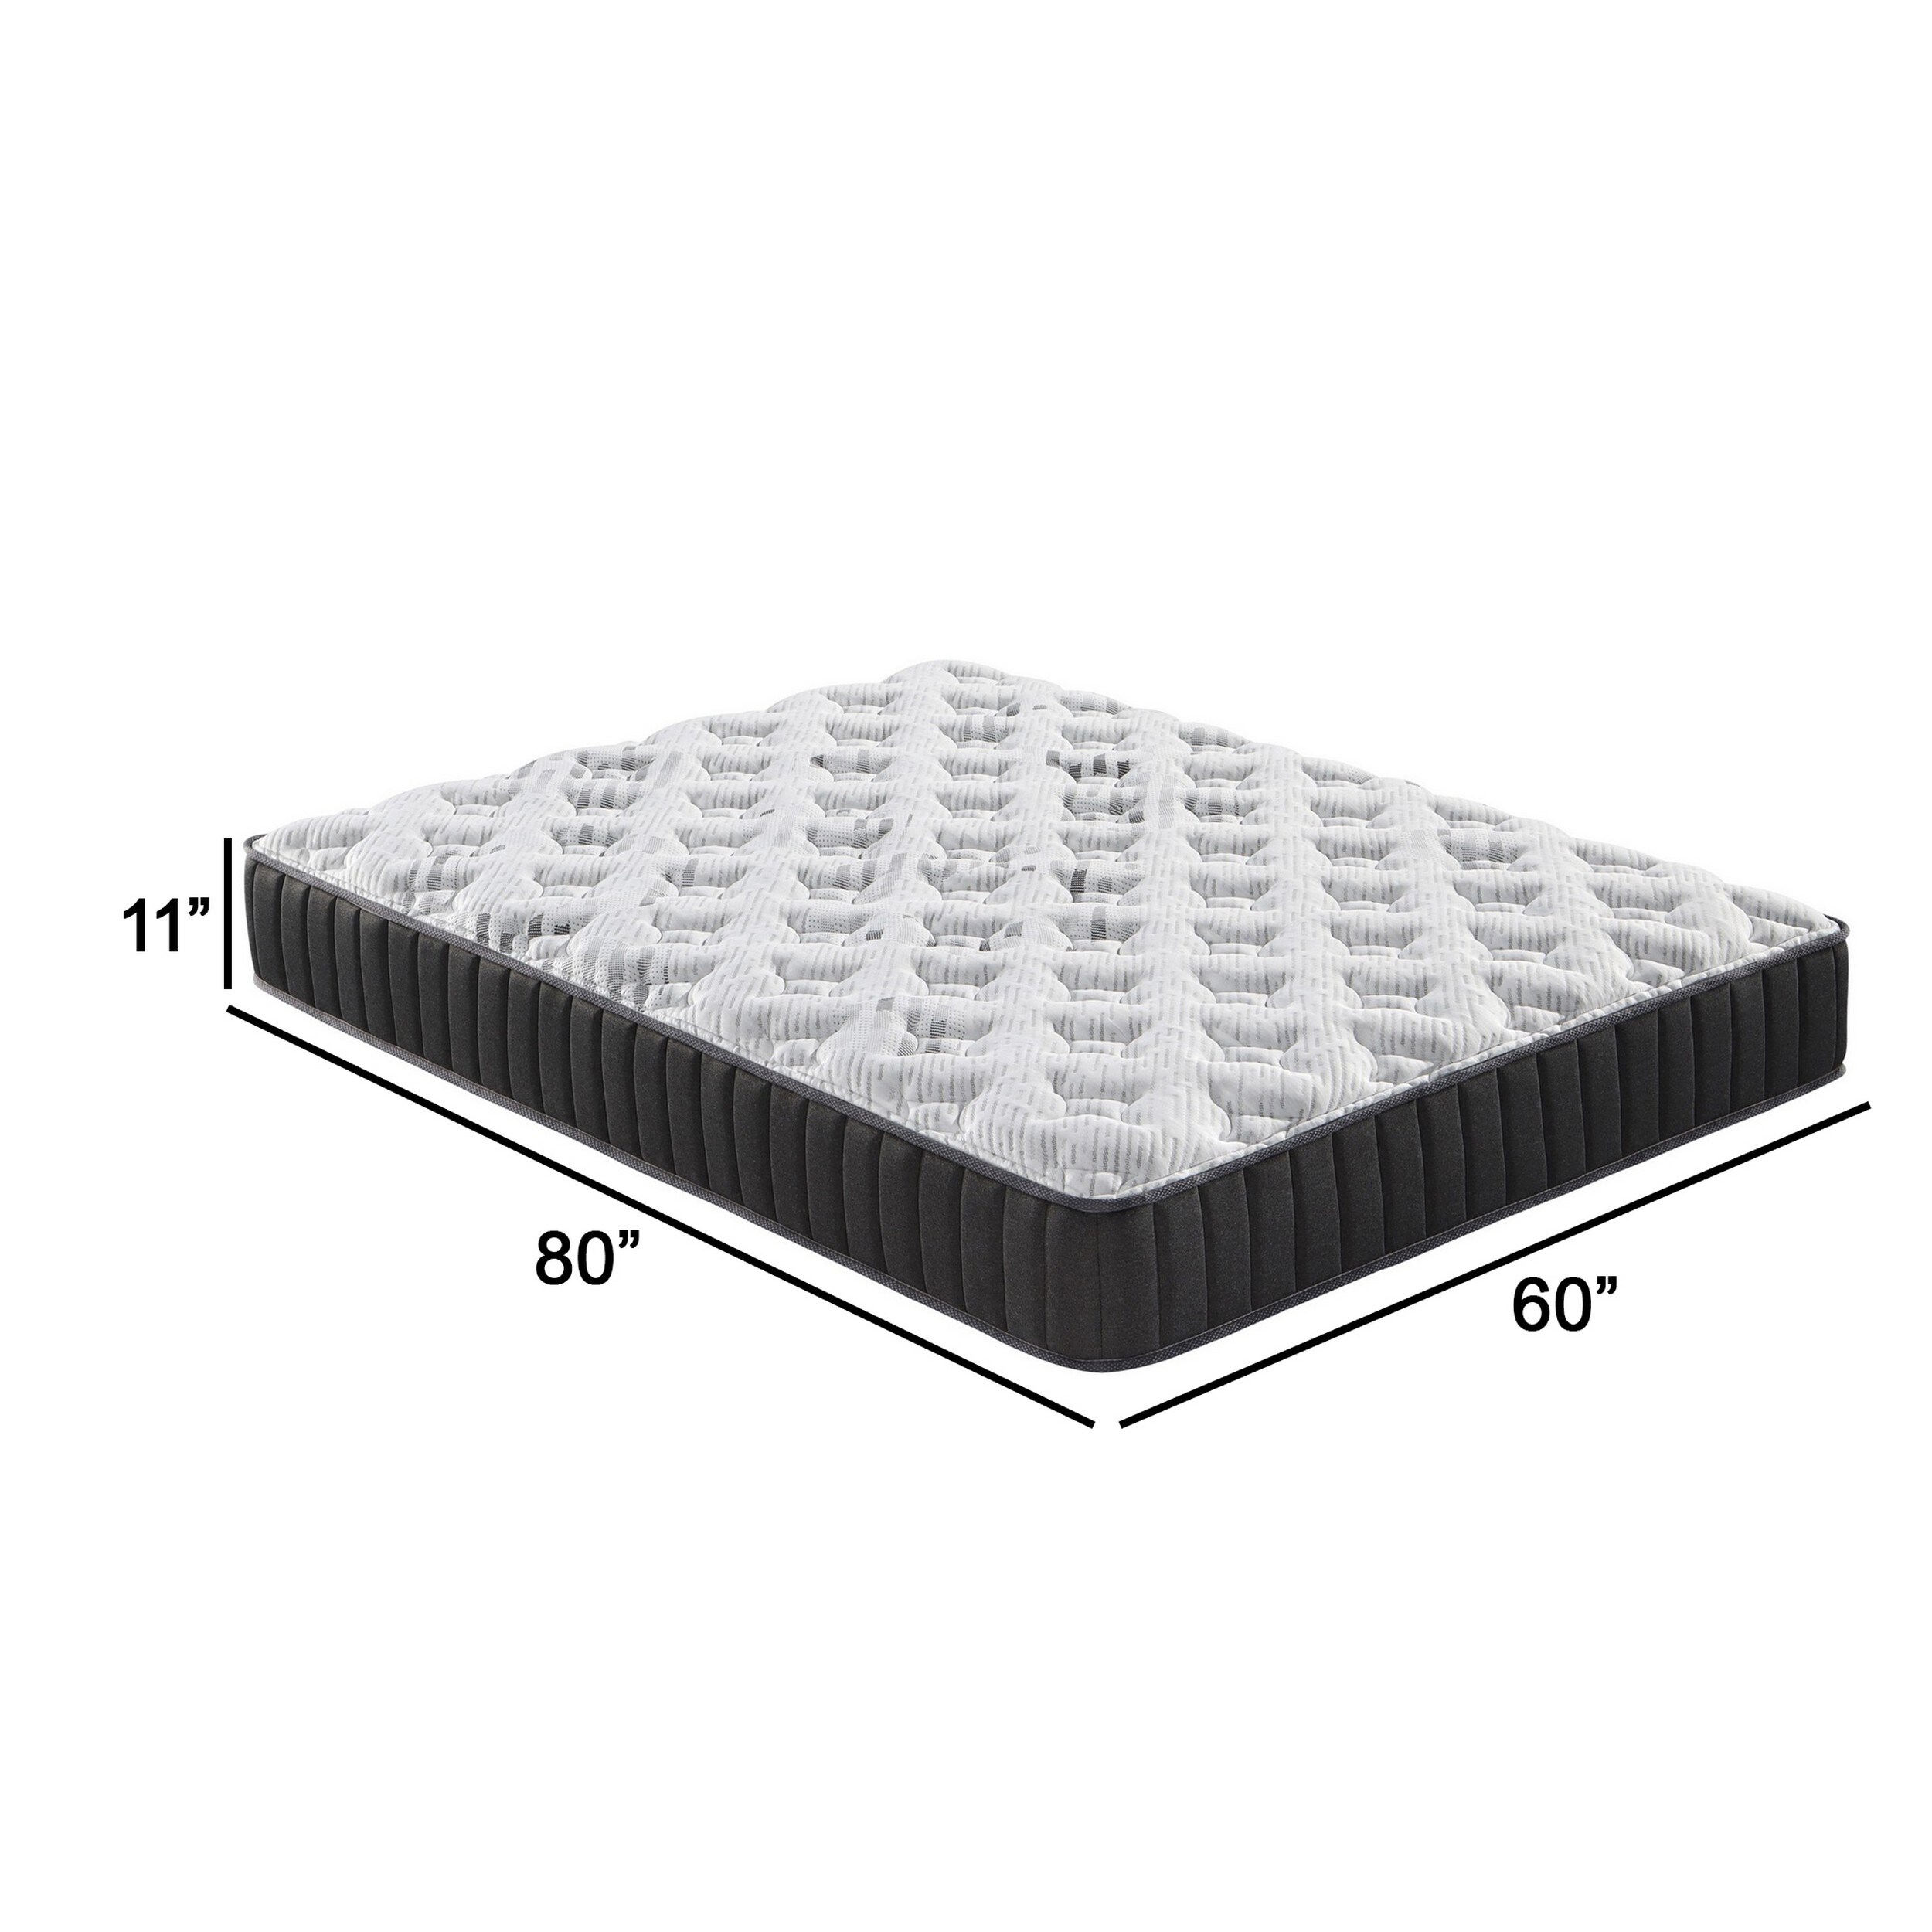 Pal 11 Inch Queen Size Foam Mattress, Pocket Coils, Tight Soft Top Cover